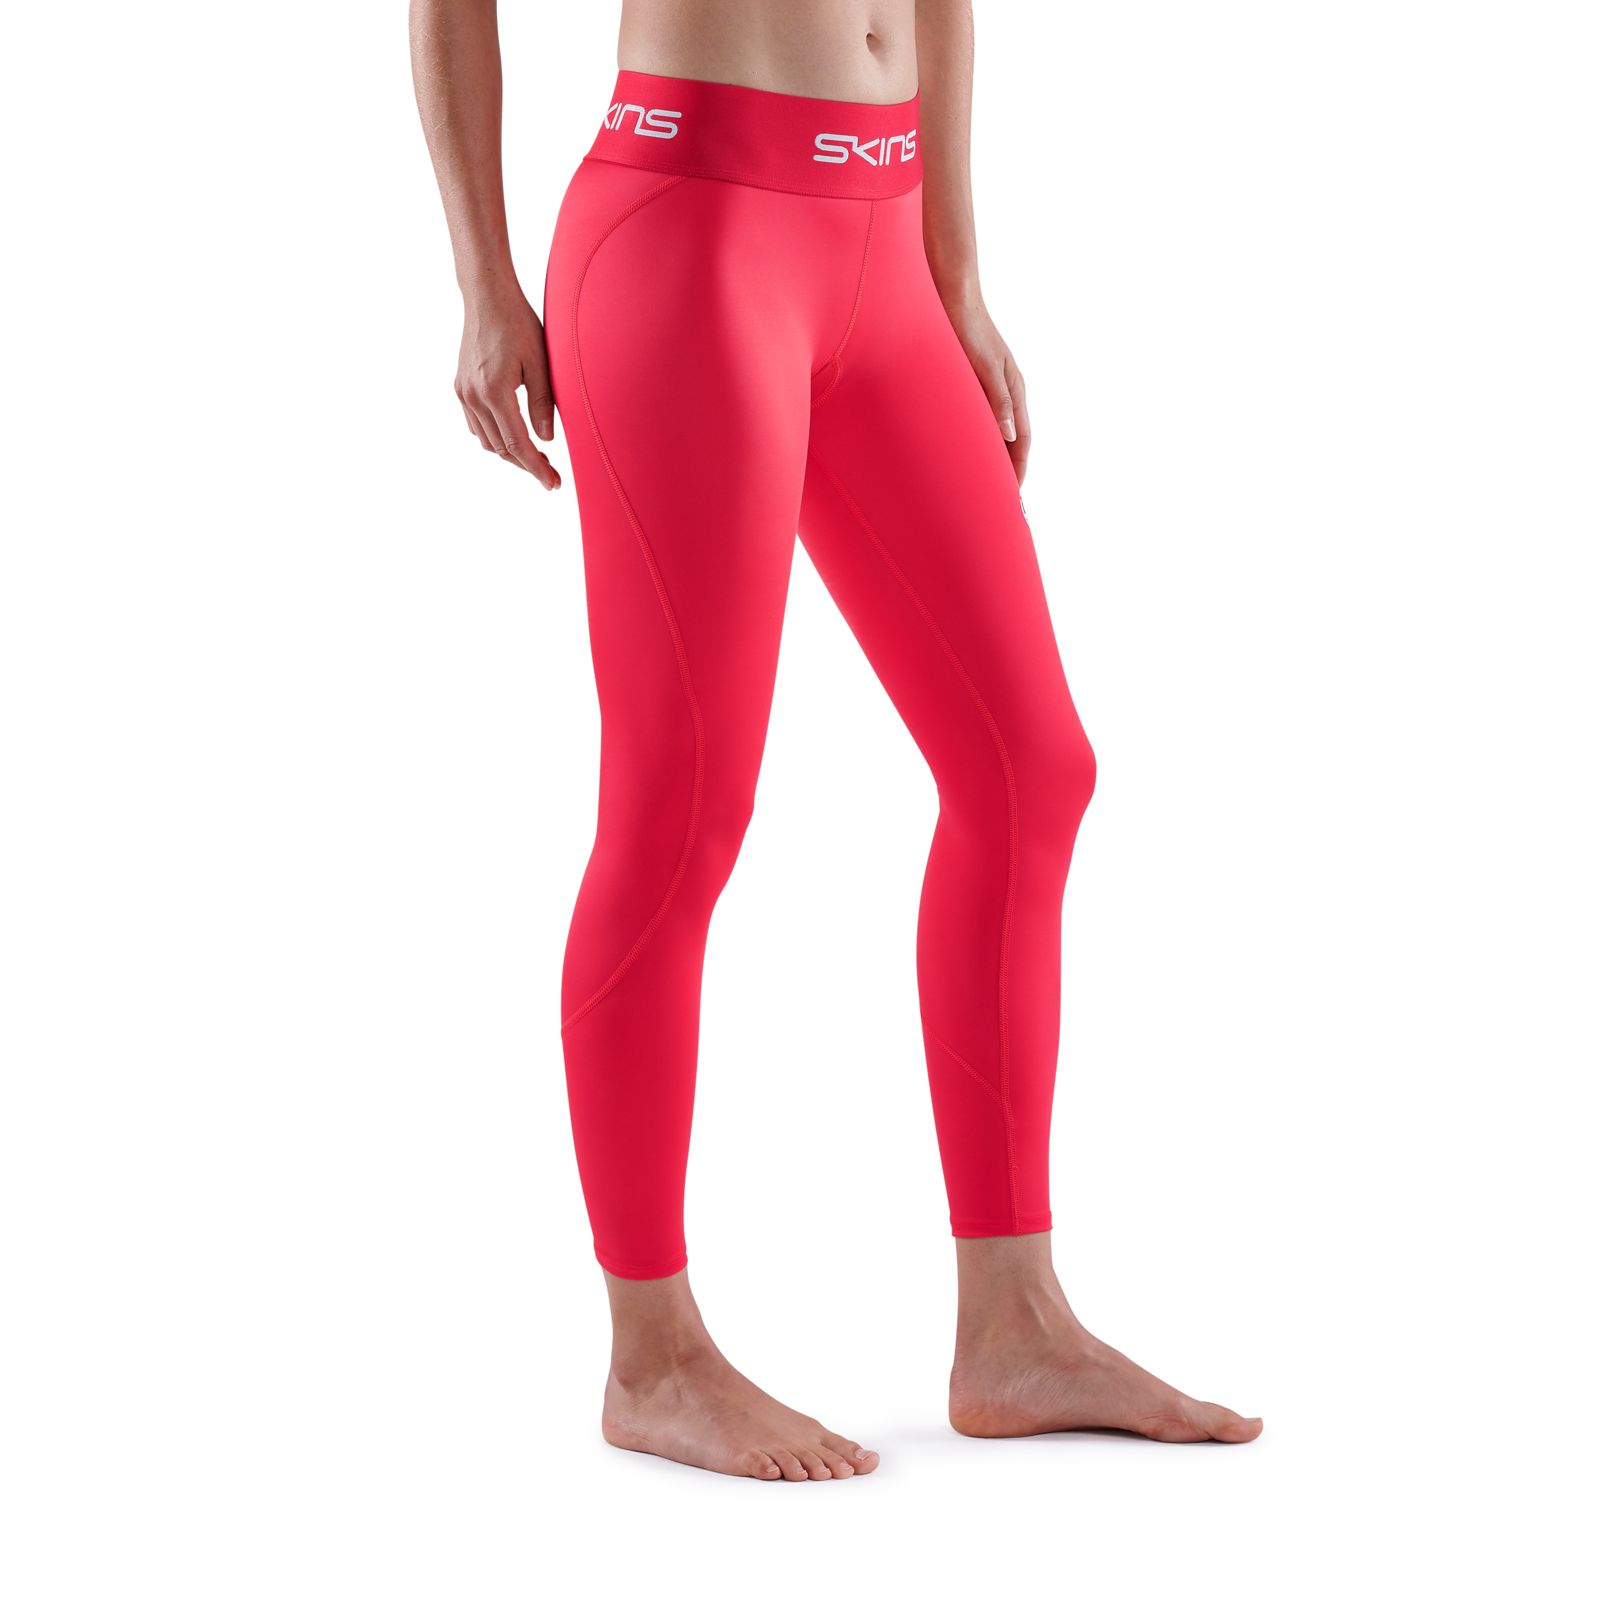 SKINS SERIES-1 WOMEN'S 7/8 TIGHTS RED - SKINS Compression USA